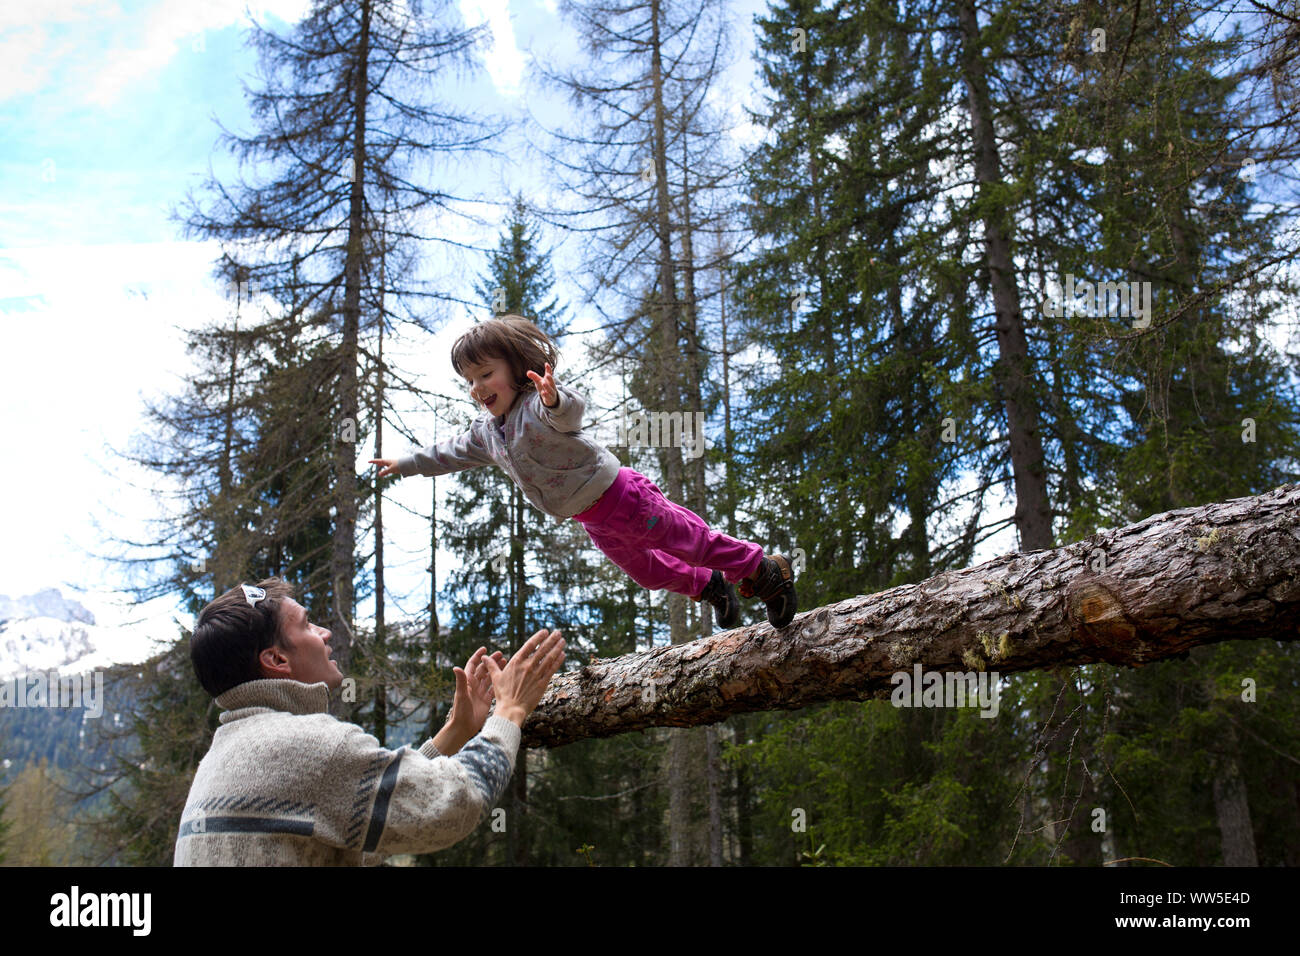 30-40 years old father catching 3-6 years old jumping daughter Stock Photo